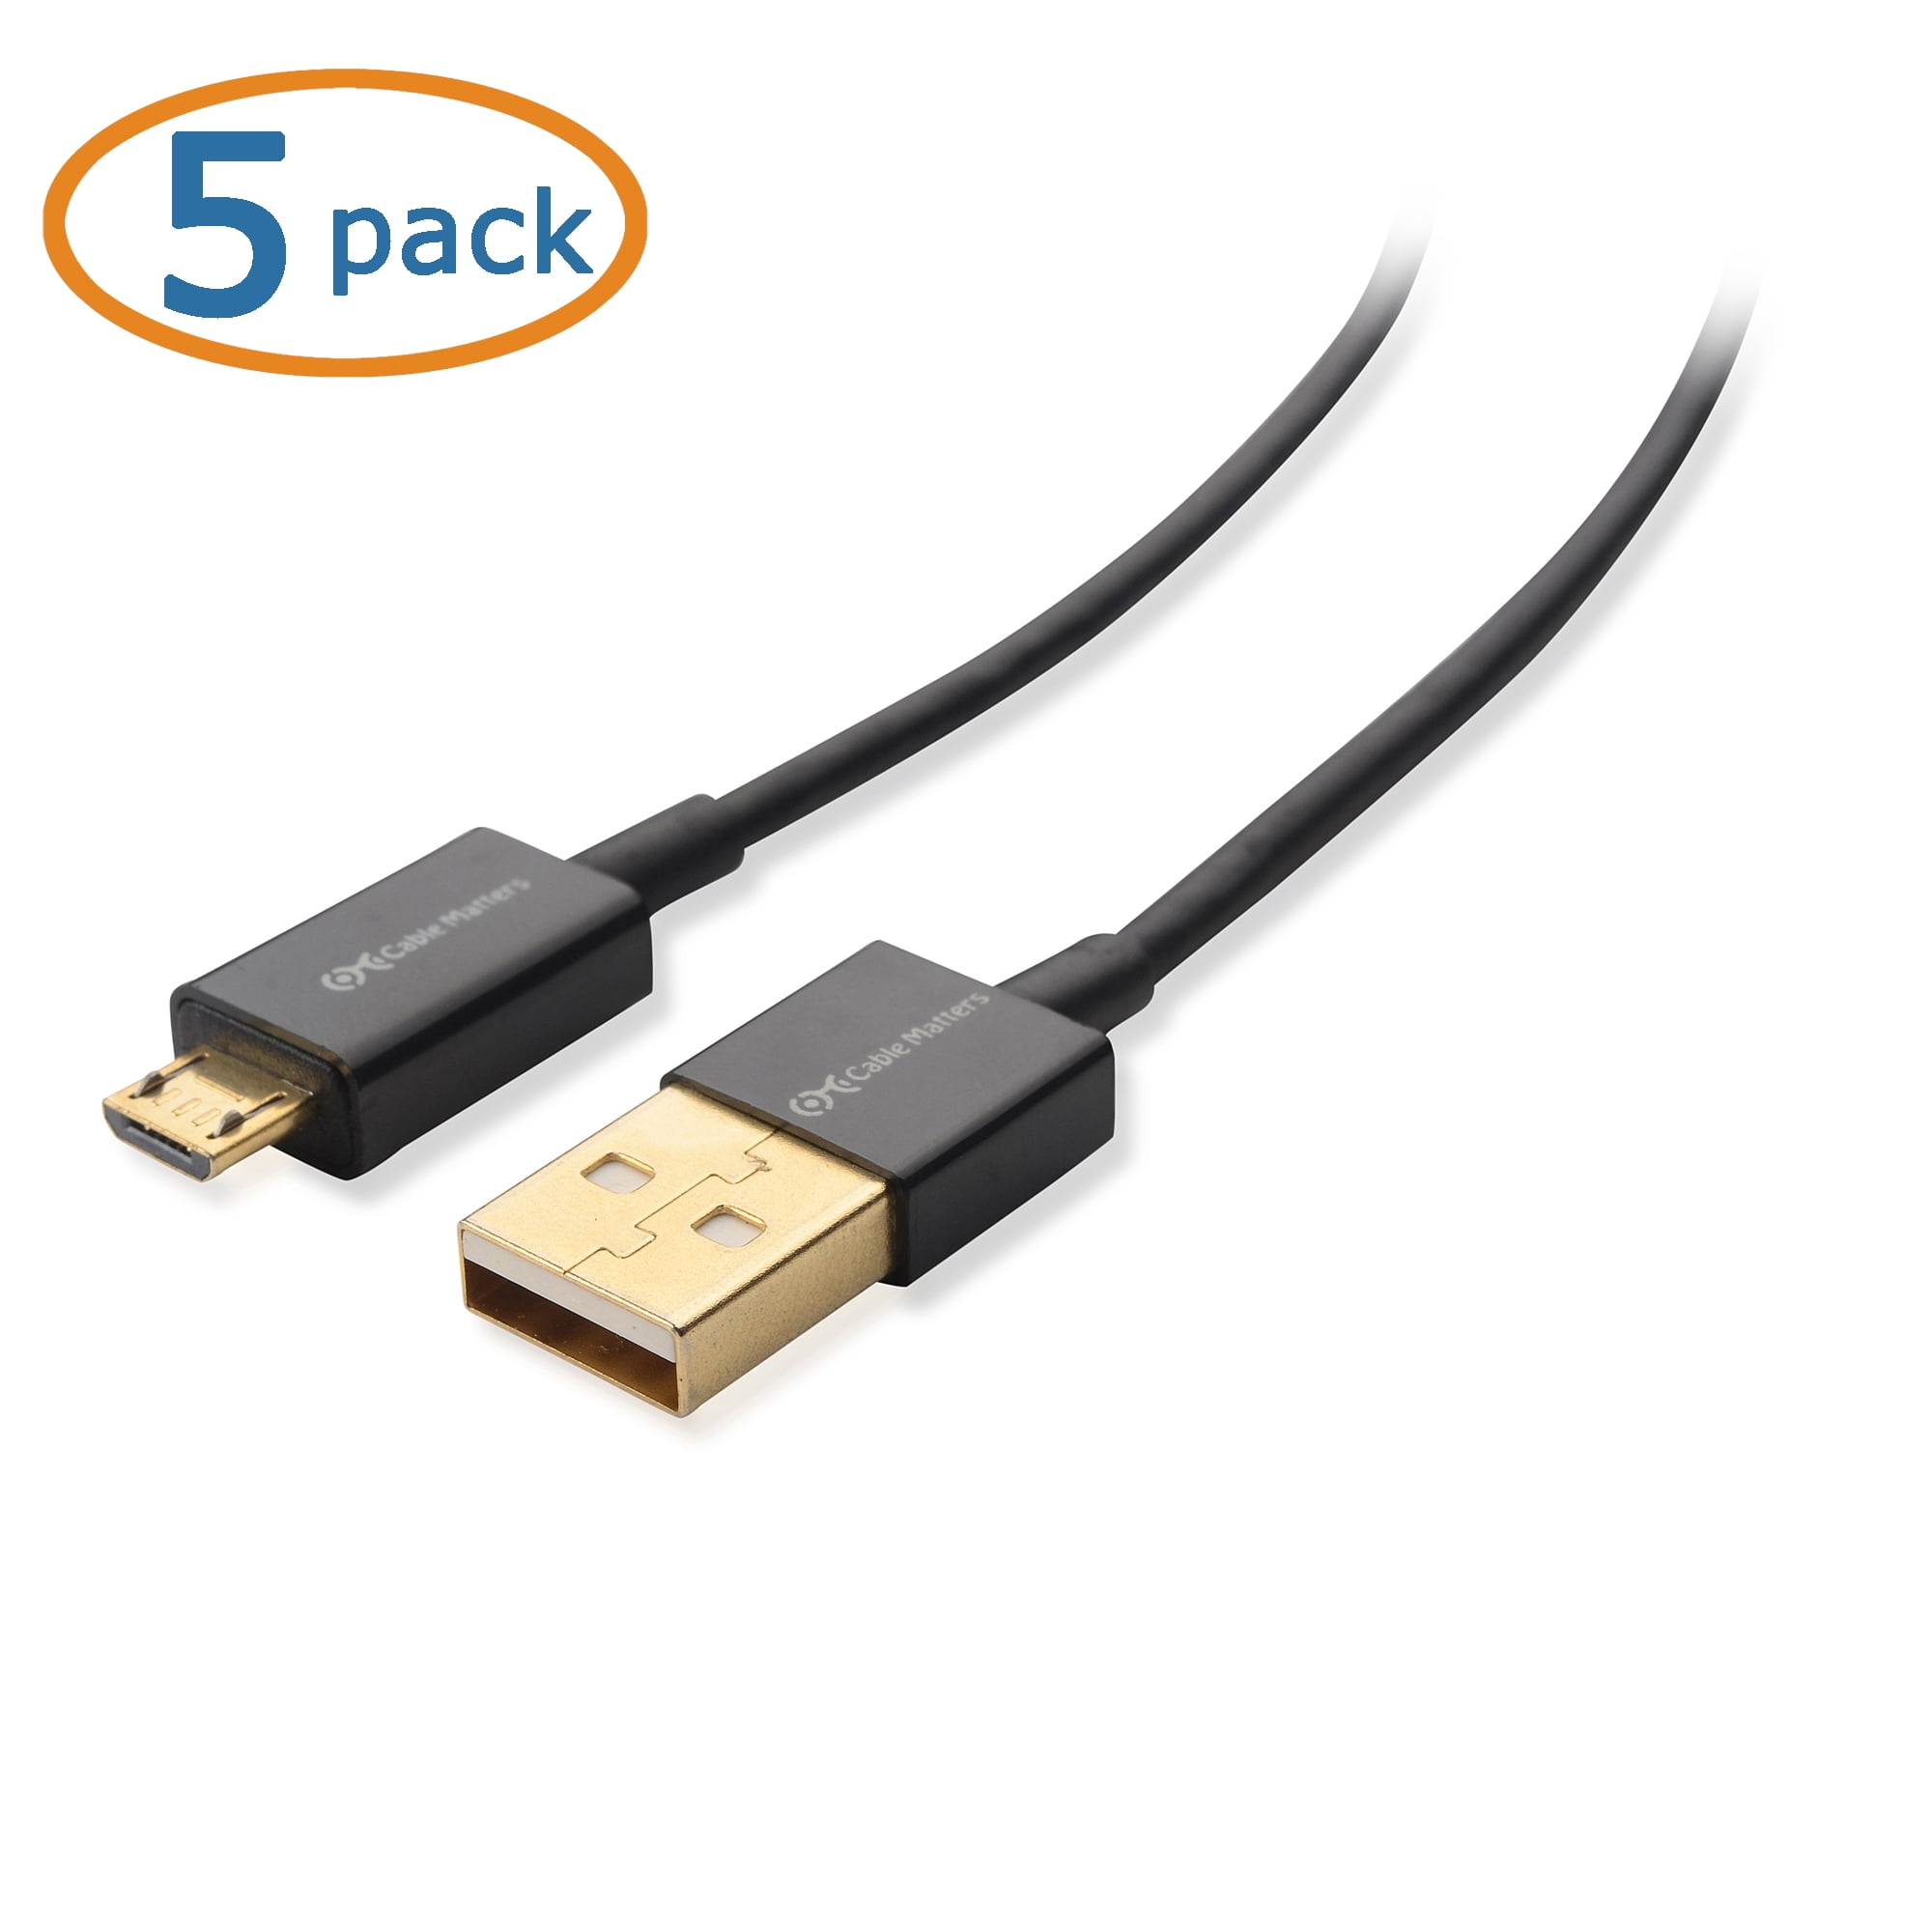 Mini USB to USB Cable Cable Matters 3-Pack USB to Mini USB Cable 6 ft 